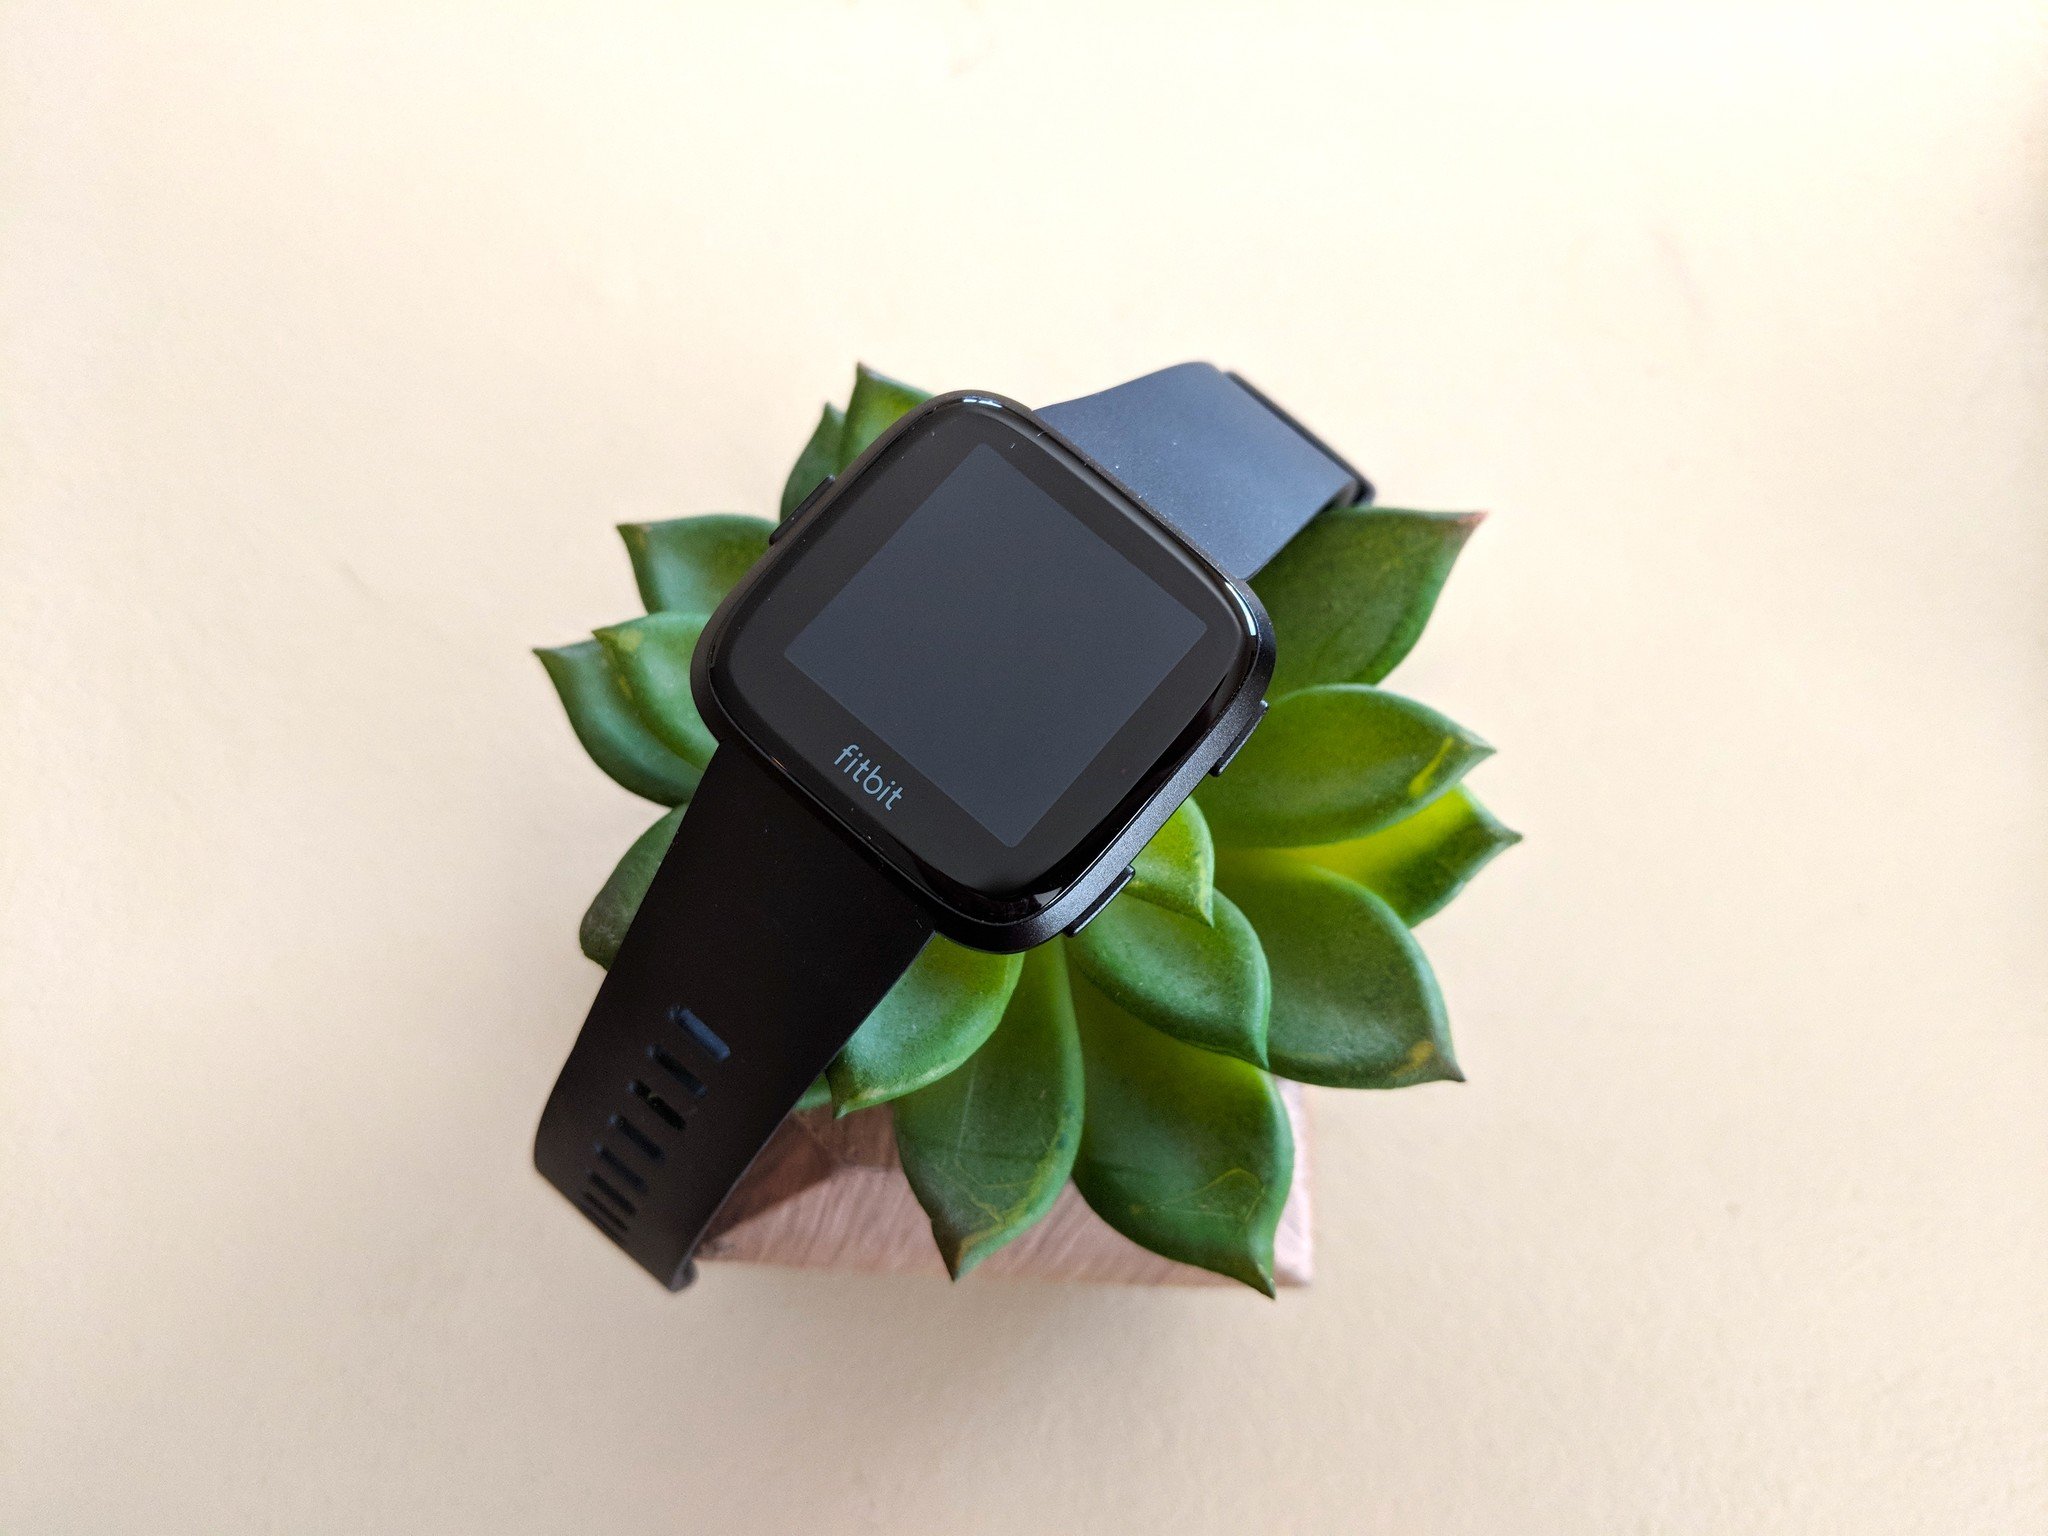 fitbit versa android